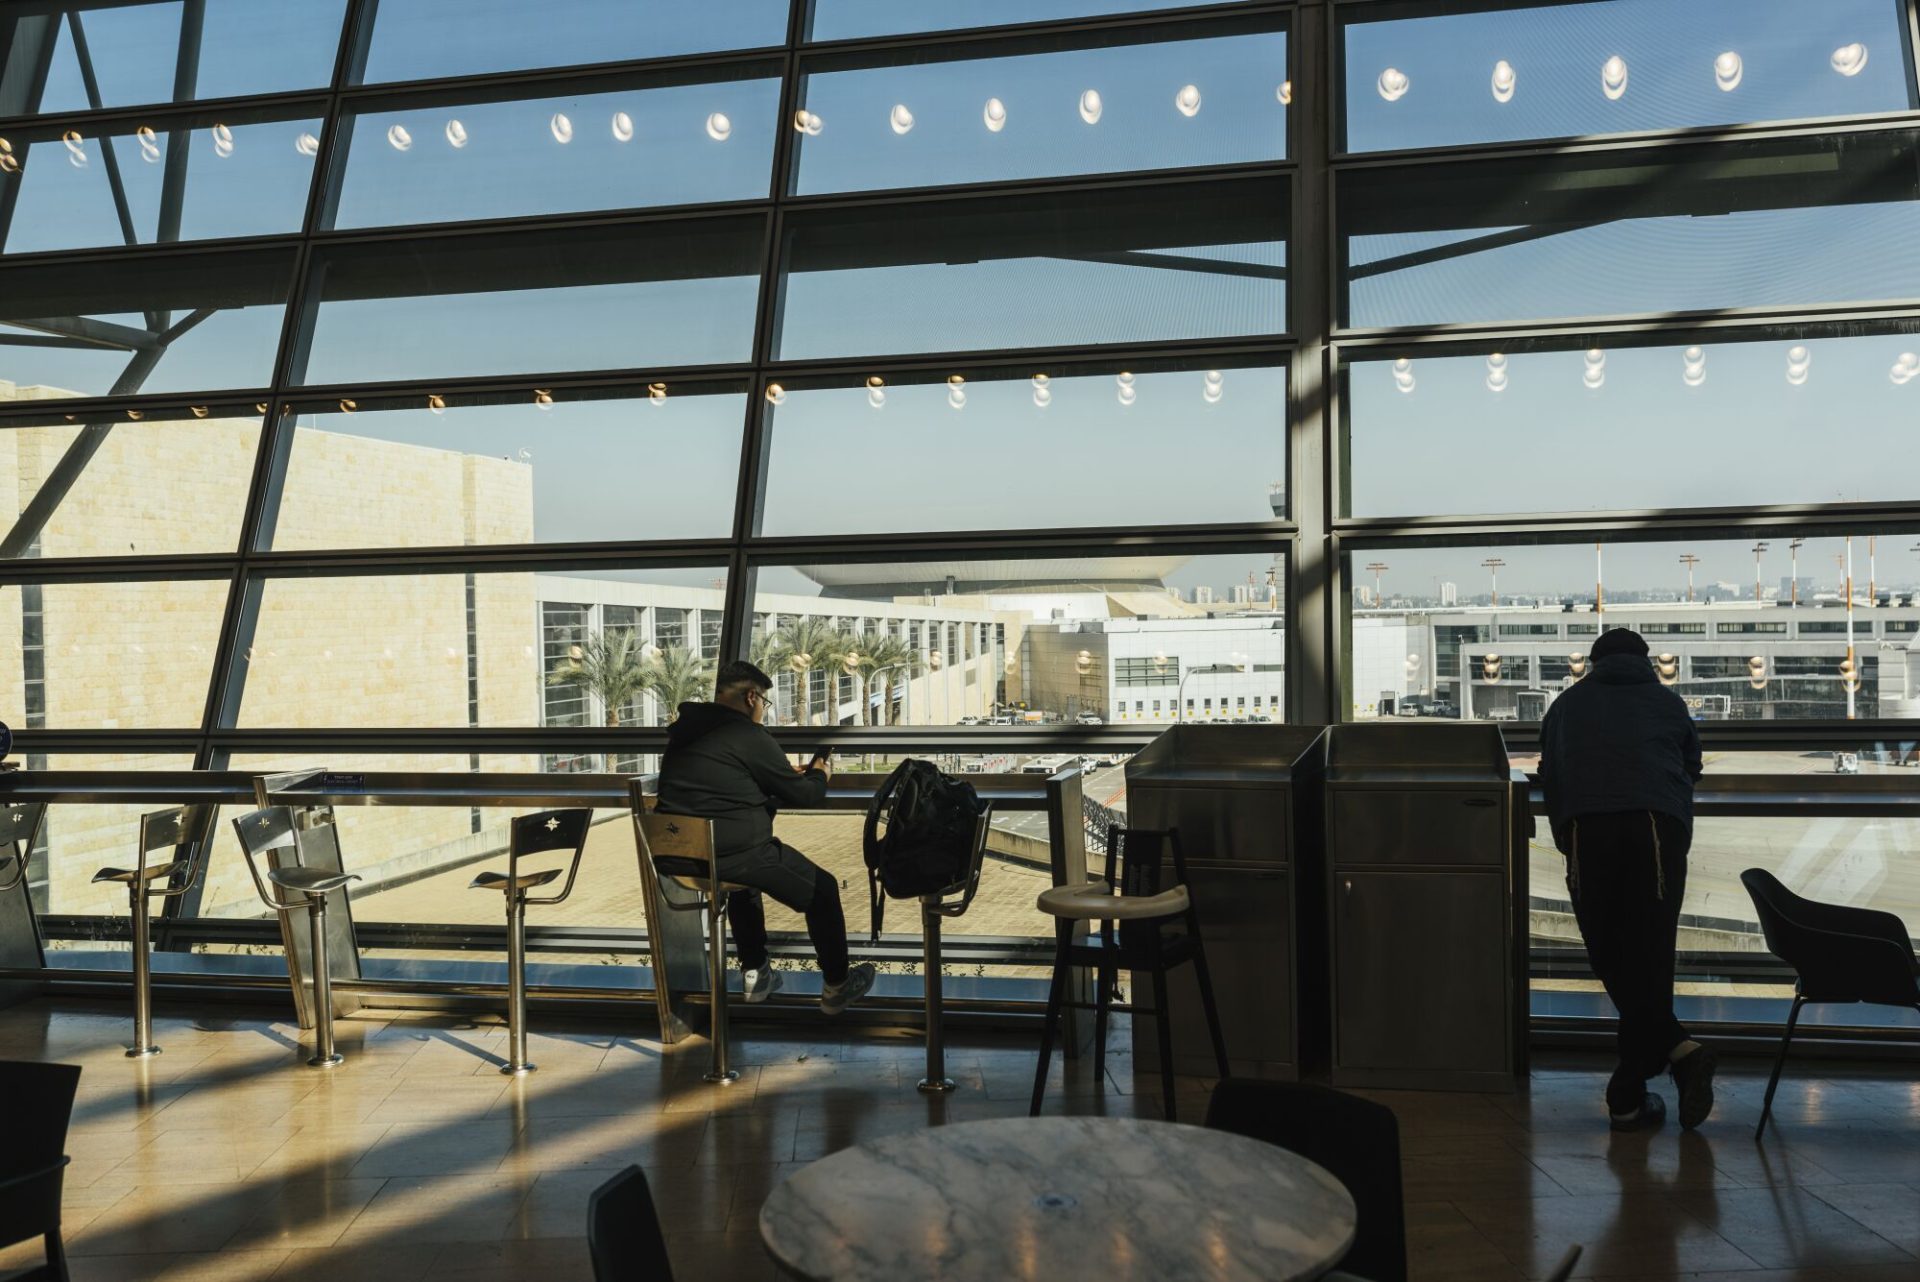 A man sits in an airport lounge with glass windows facing buildings